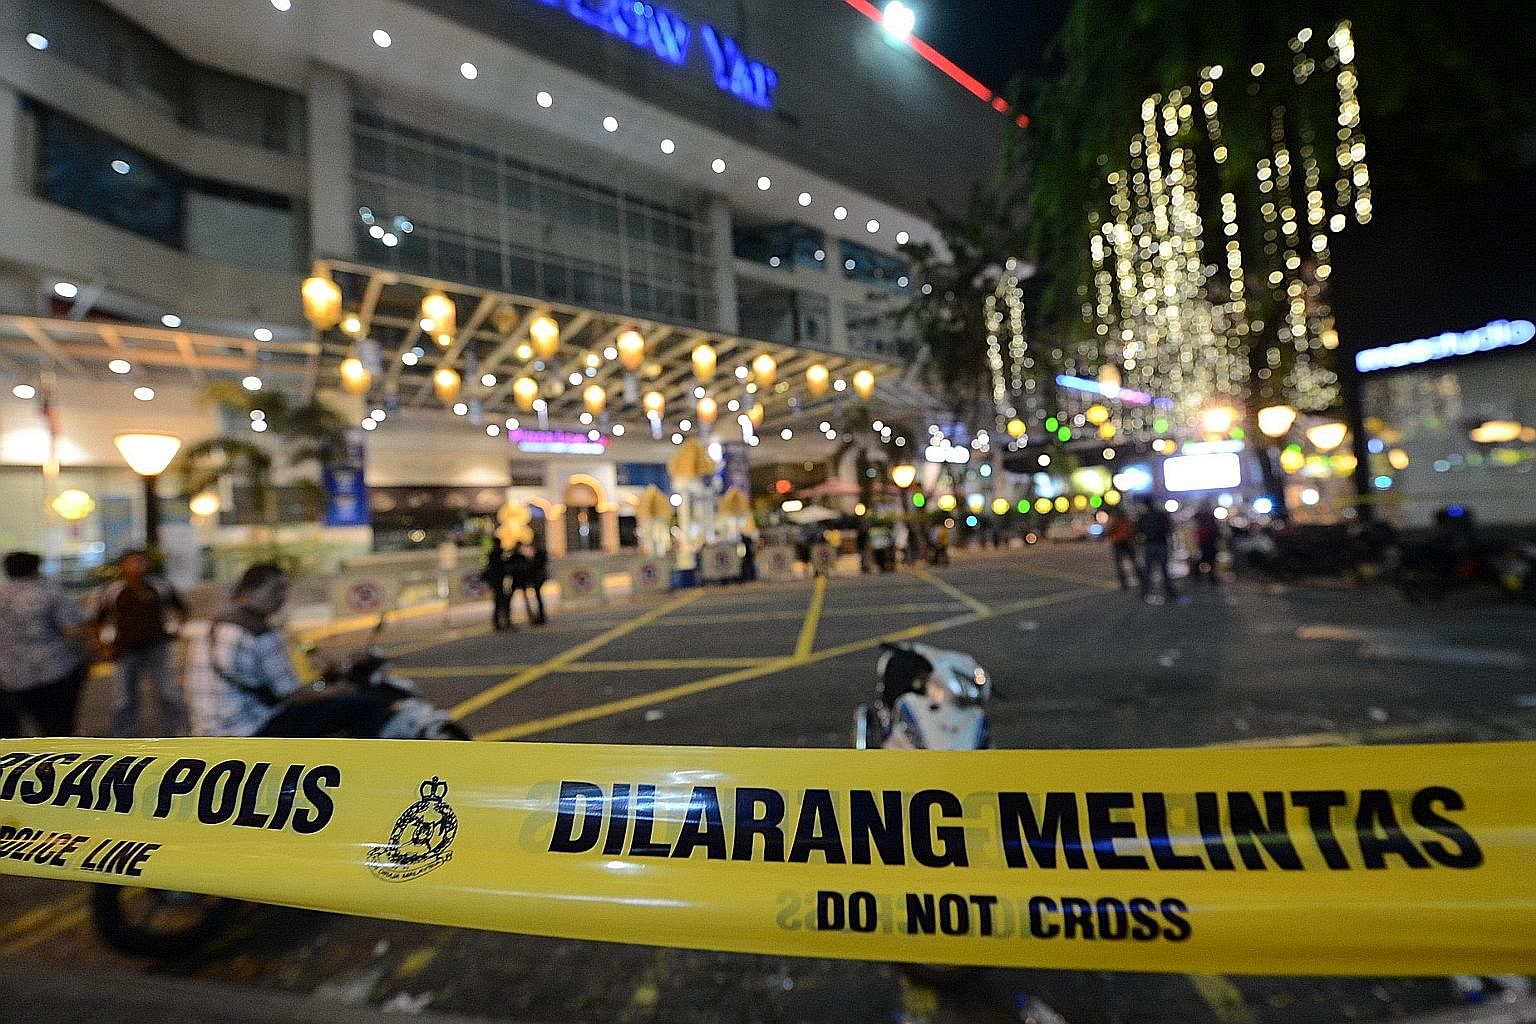 The aftermath of the clash between Chinese and Malays at Low Yat Plaza in Kuala Lumpur last month. If Malaysia is troubled, unstable or divided, Singapore's economy, society and security will be affected.